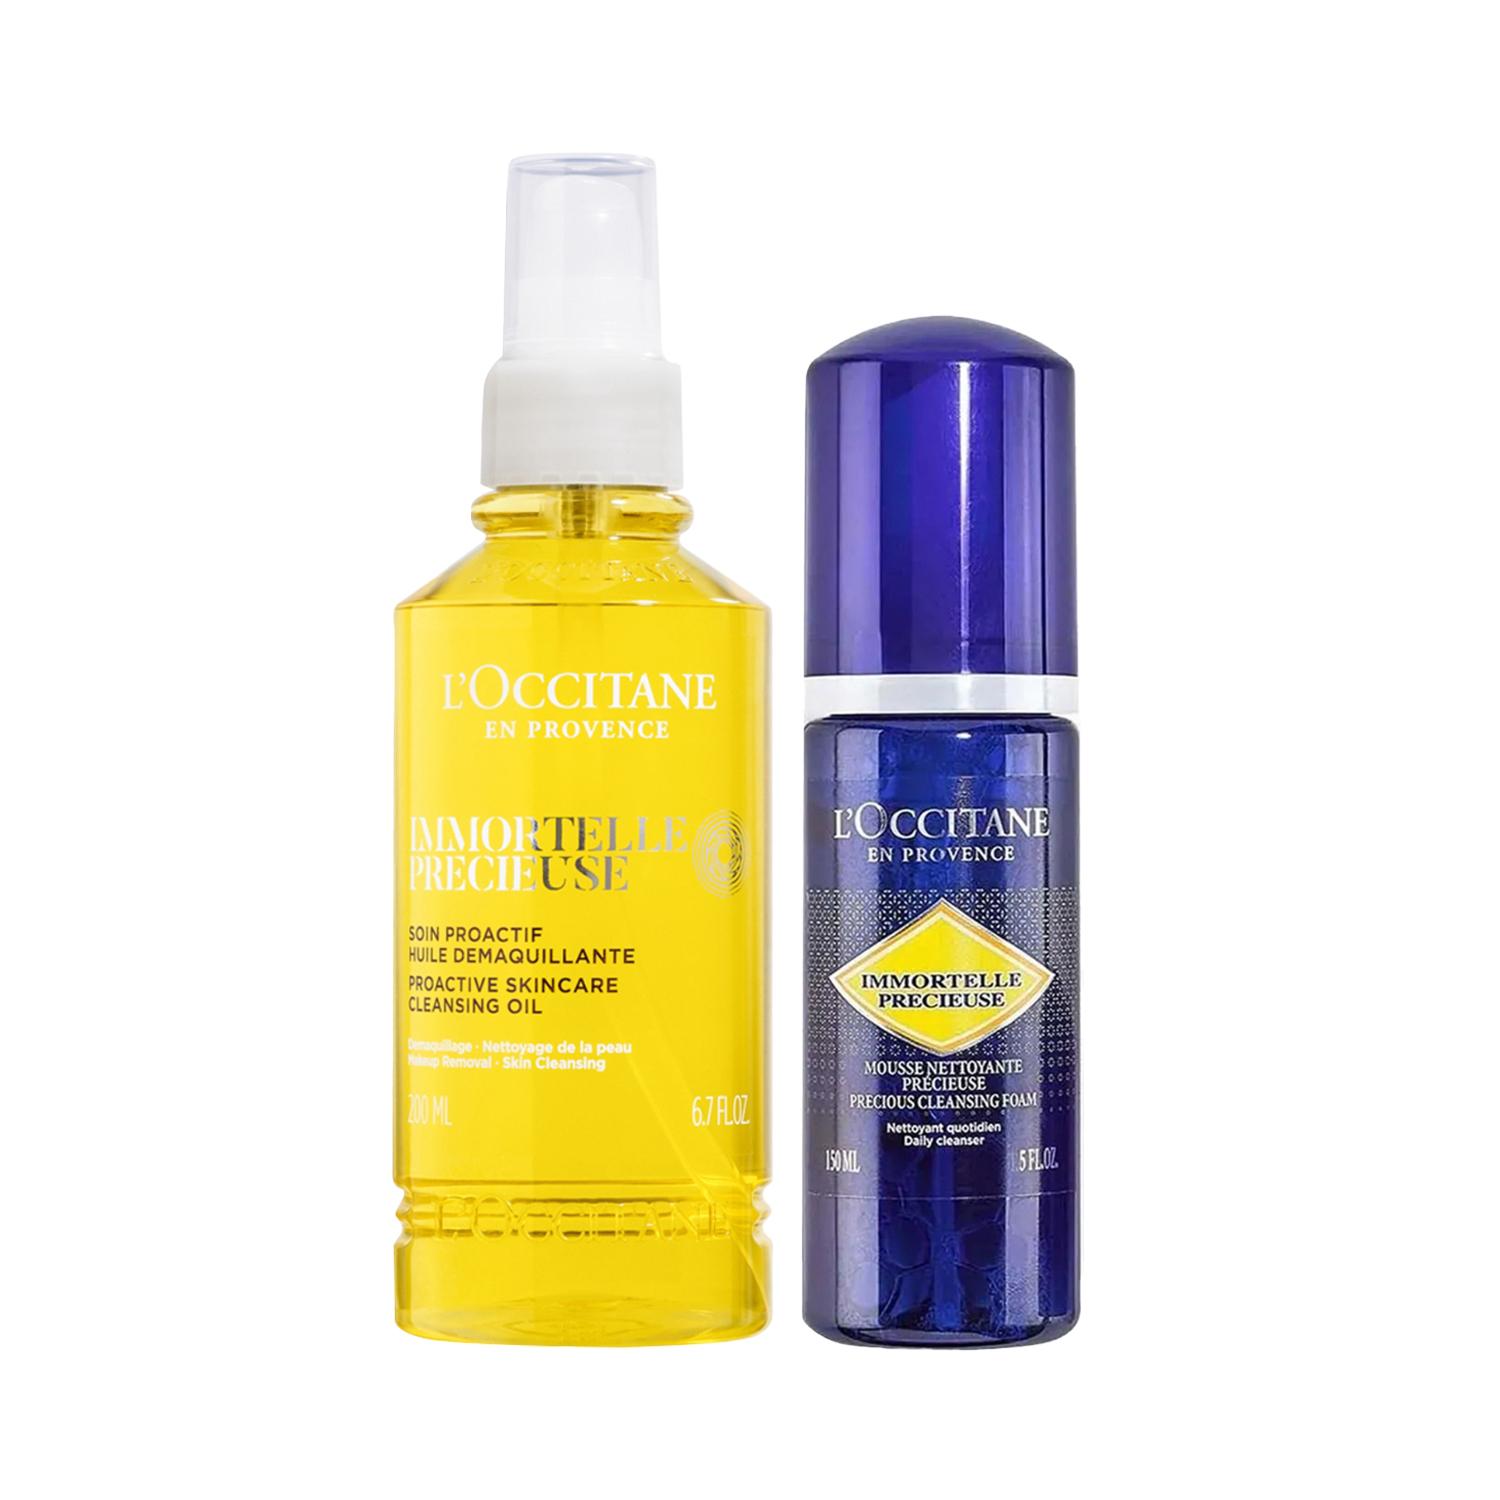 L'occitane | L'occitane Immortelle Precious Double Cleansing Duo Cleansing Oil & Foaming Cleanser Combo